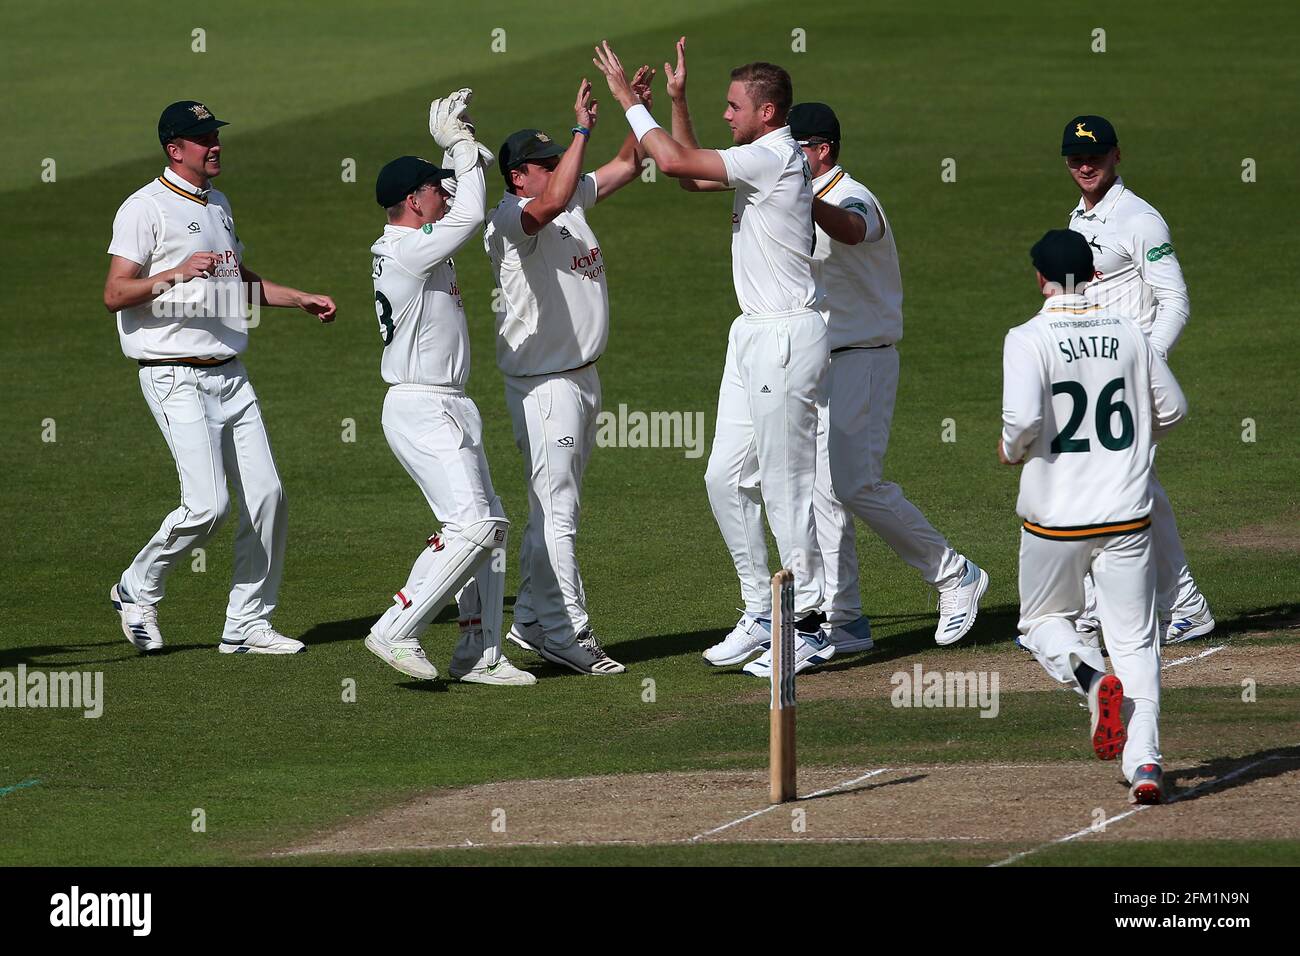 Stuart Broad of Nottinghamshire celebrates with his team mates after taking the wicket of Alastair Cook during Nottinghamshire CCC vs Essex CCC, Specs Stock Photo